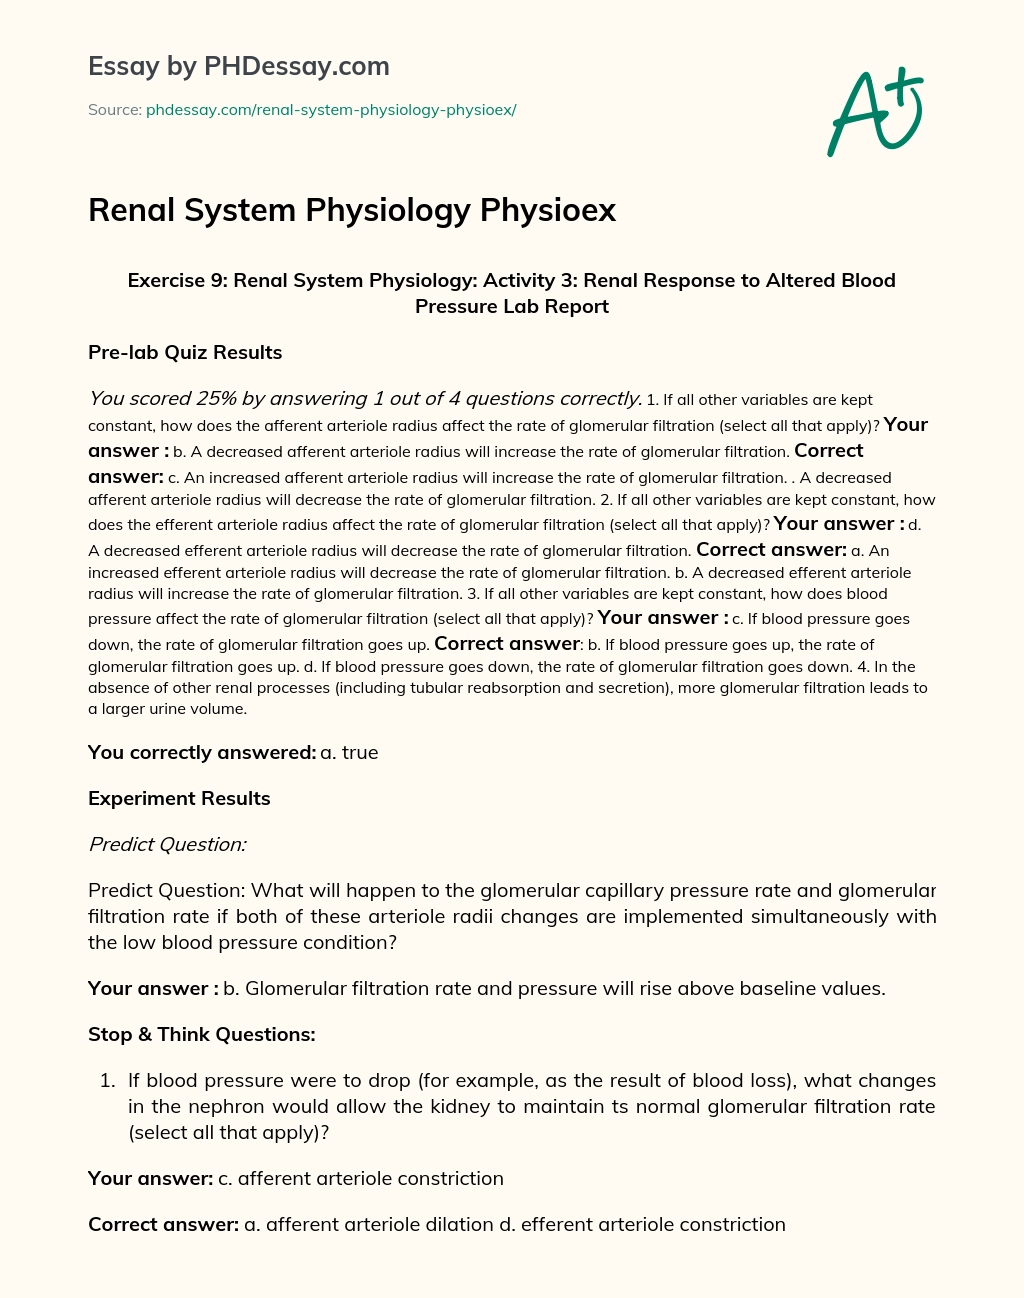 Renal System Physiology Physioex essay